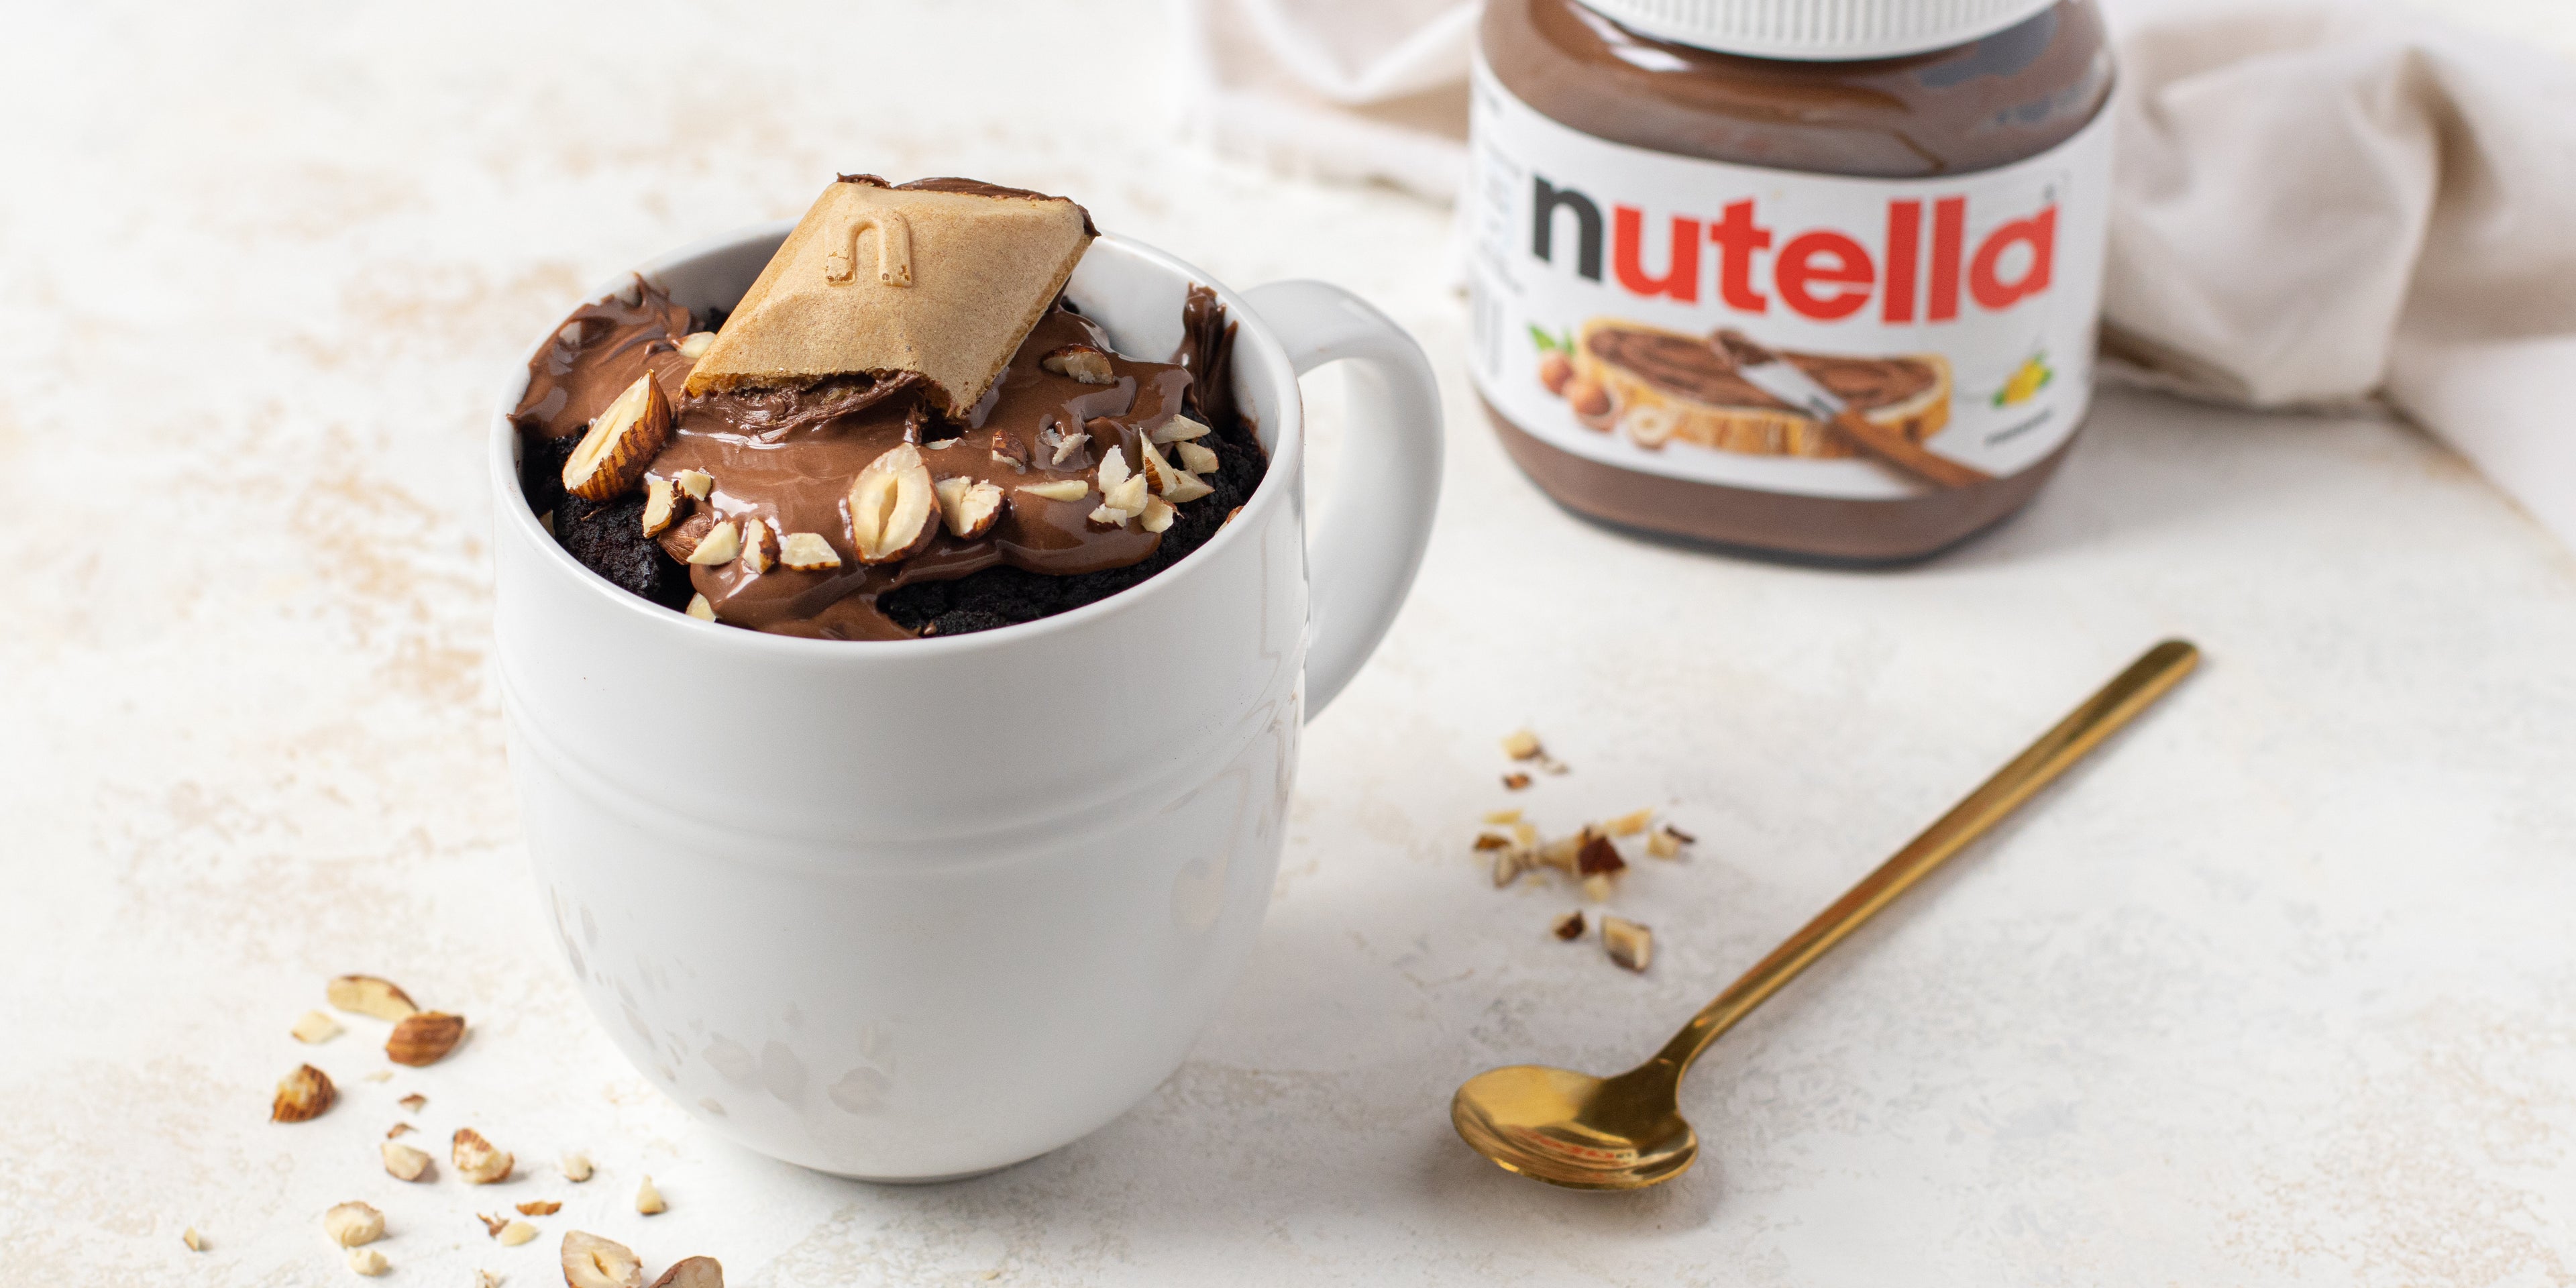 Chocolate Mug Cake customised with Nutella, with Nutella spread on top and sprinkled with hazelnuts. In the background there is a jar of Nutella next to a spoon